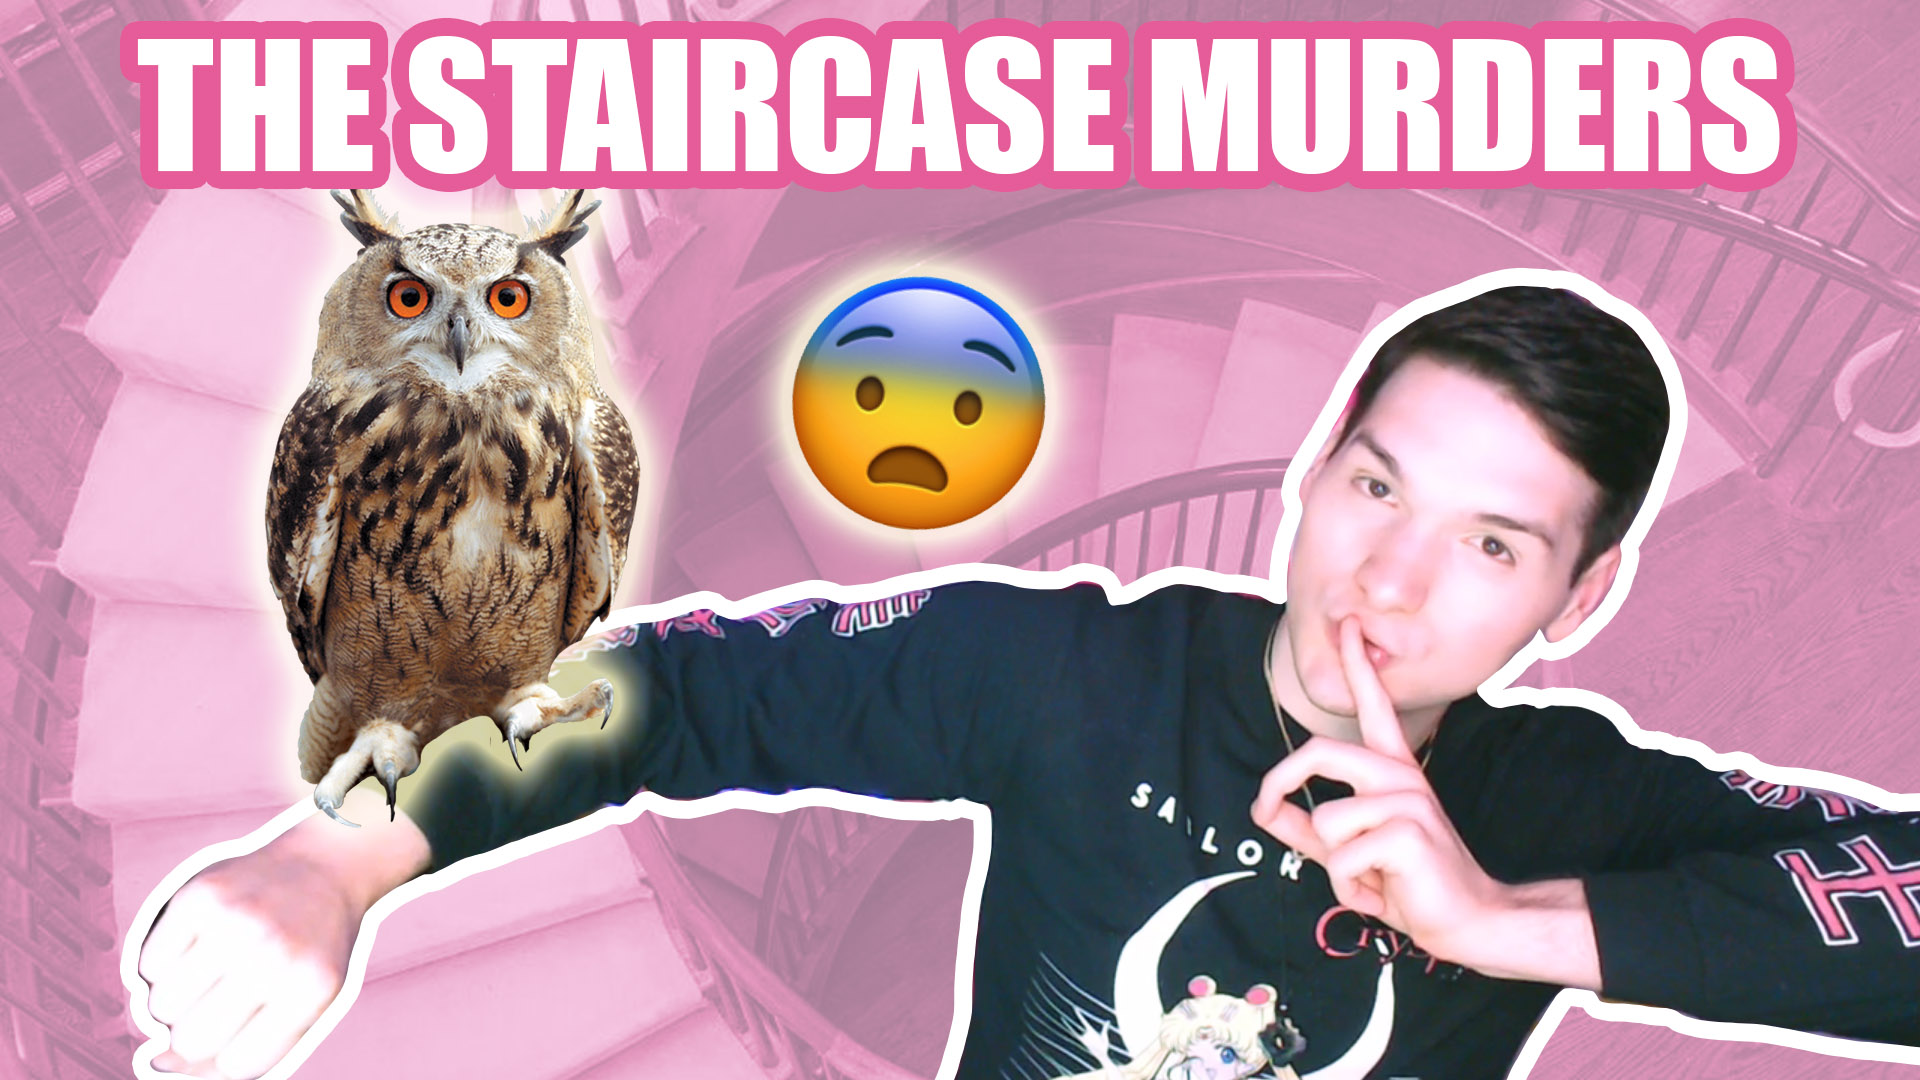 the staircase murders